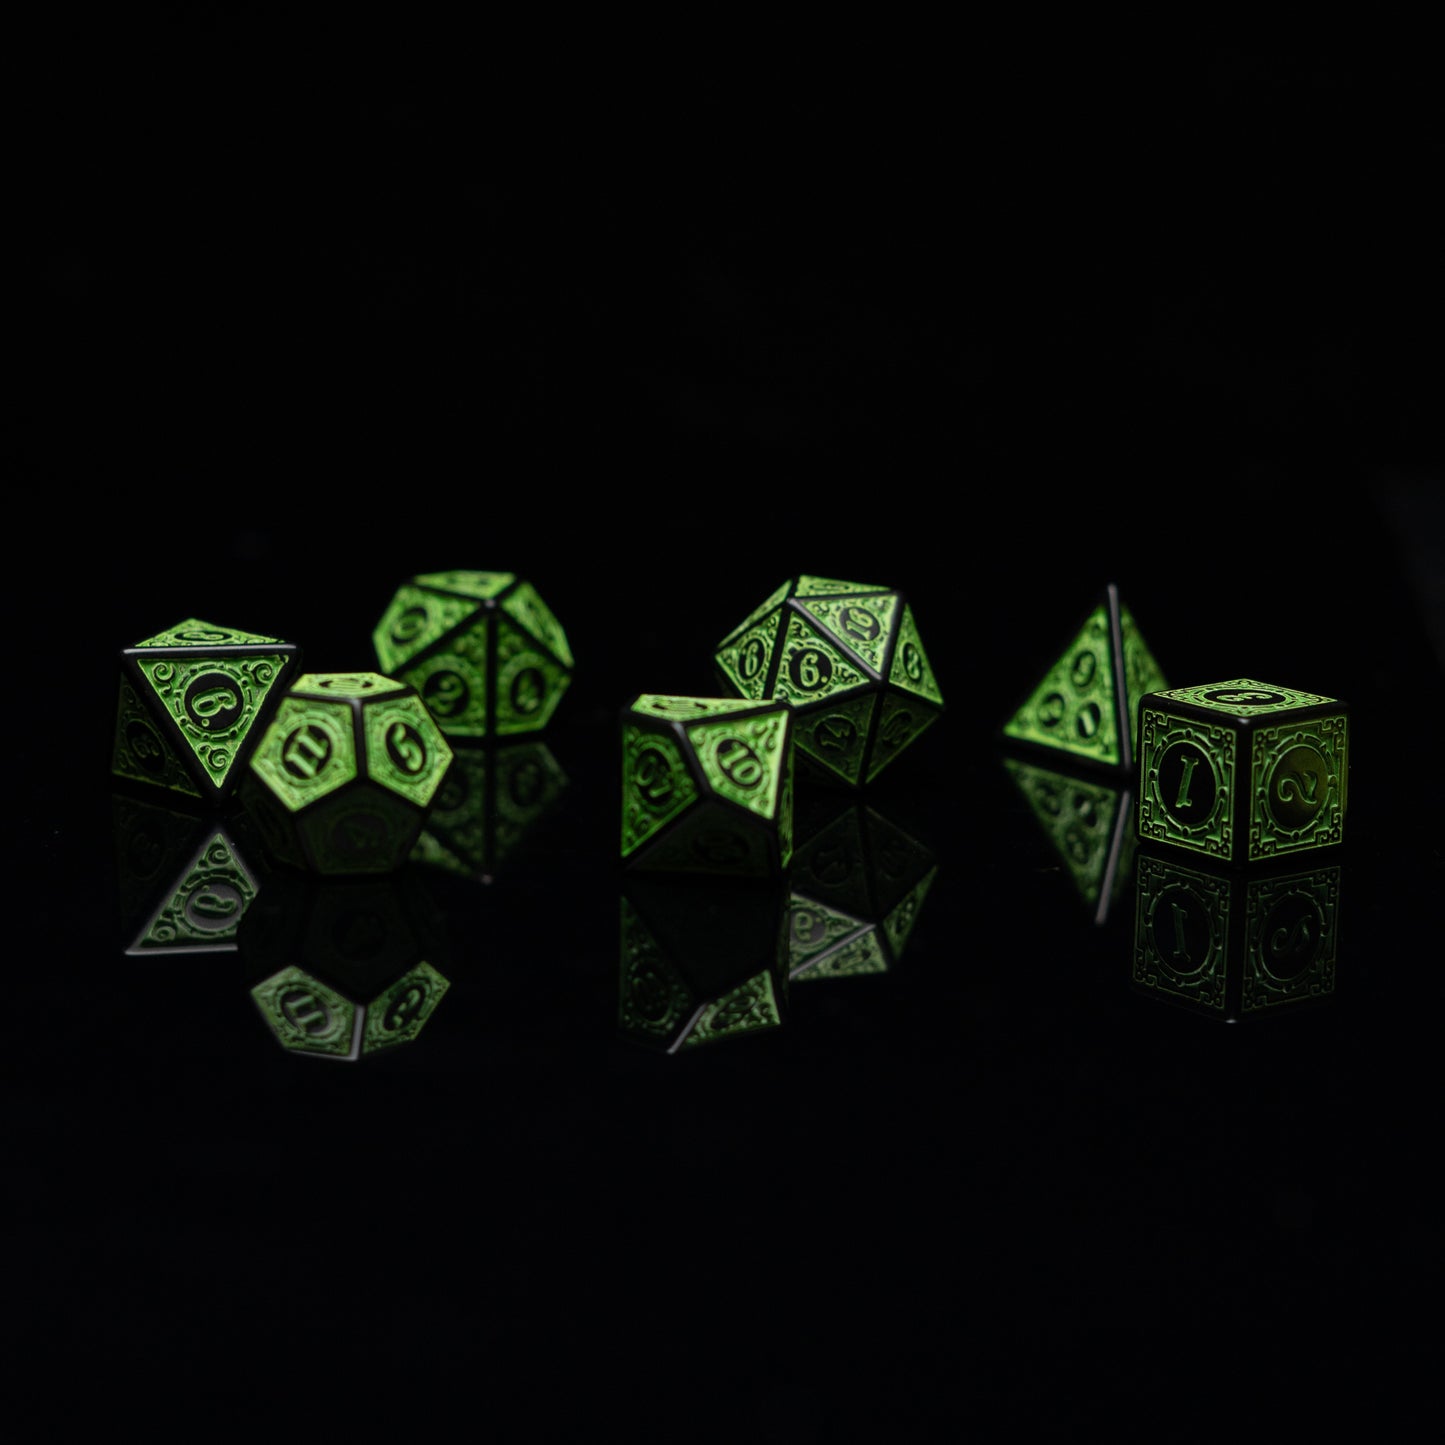 Roll Britannia Keth Frostiron Dnd Dice Set with Green Military Aesthetic